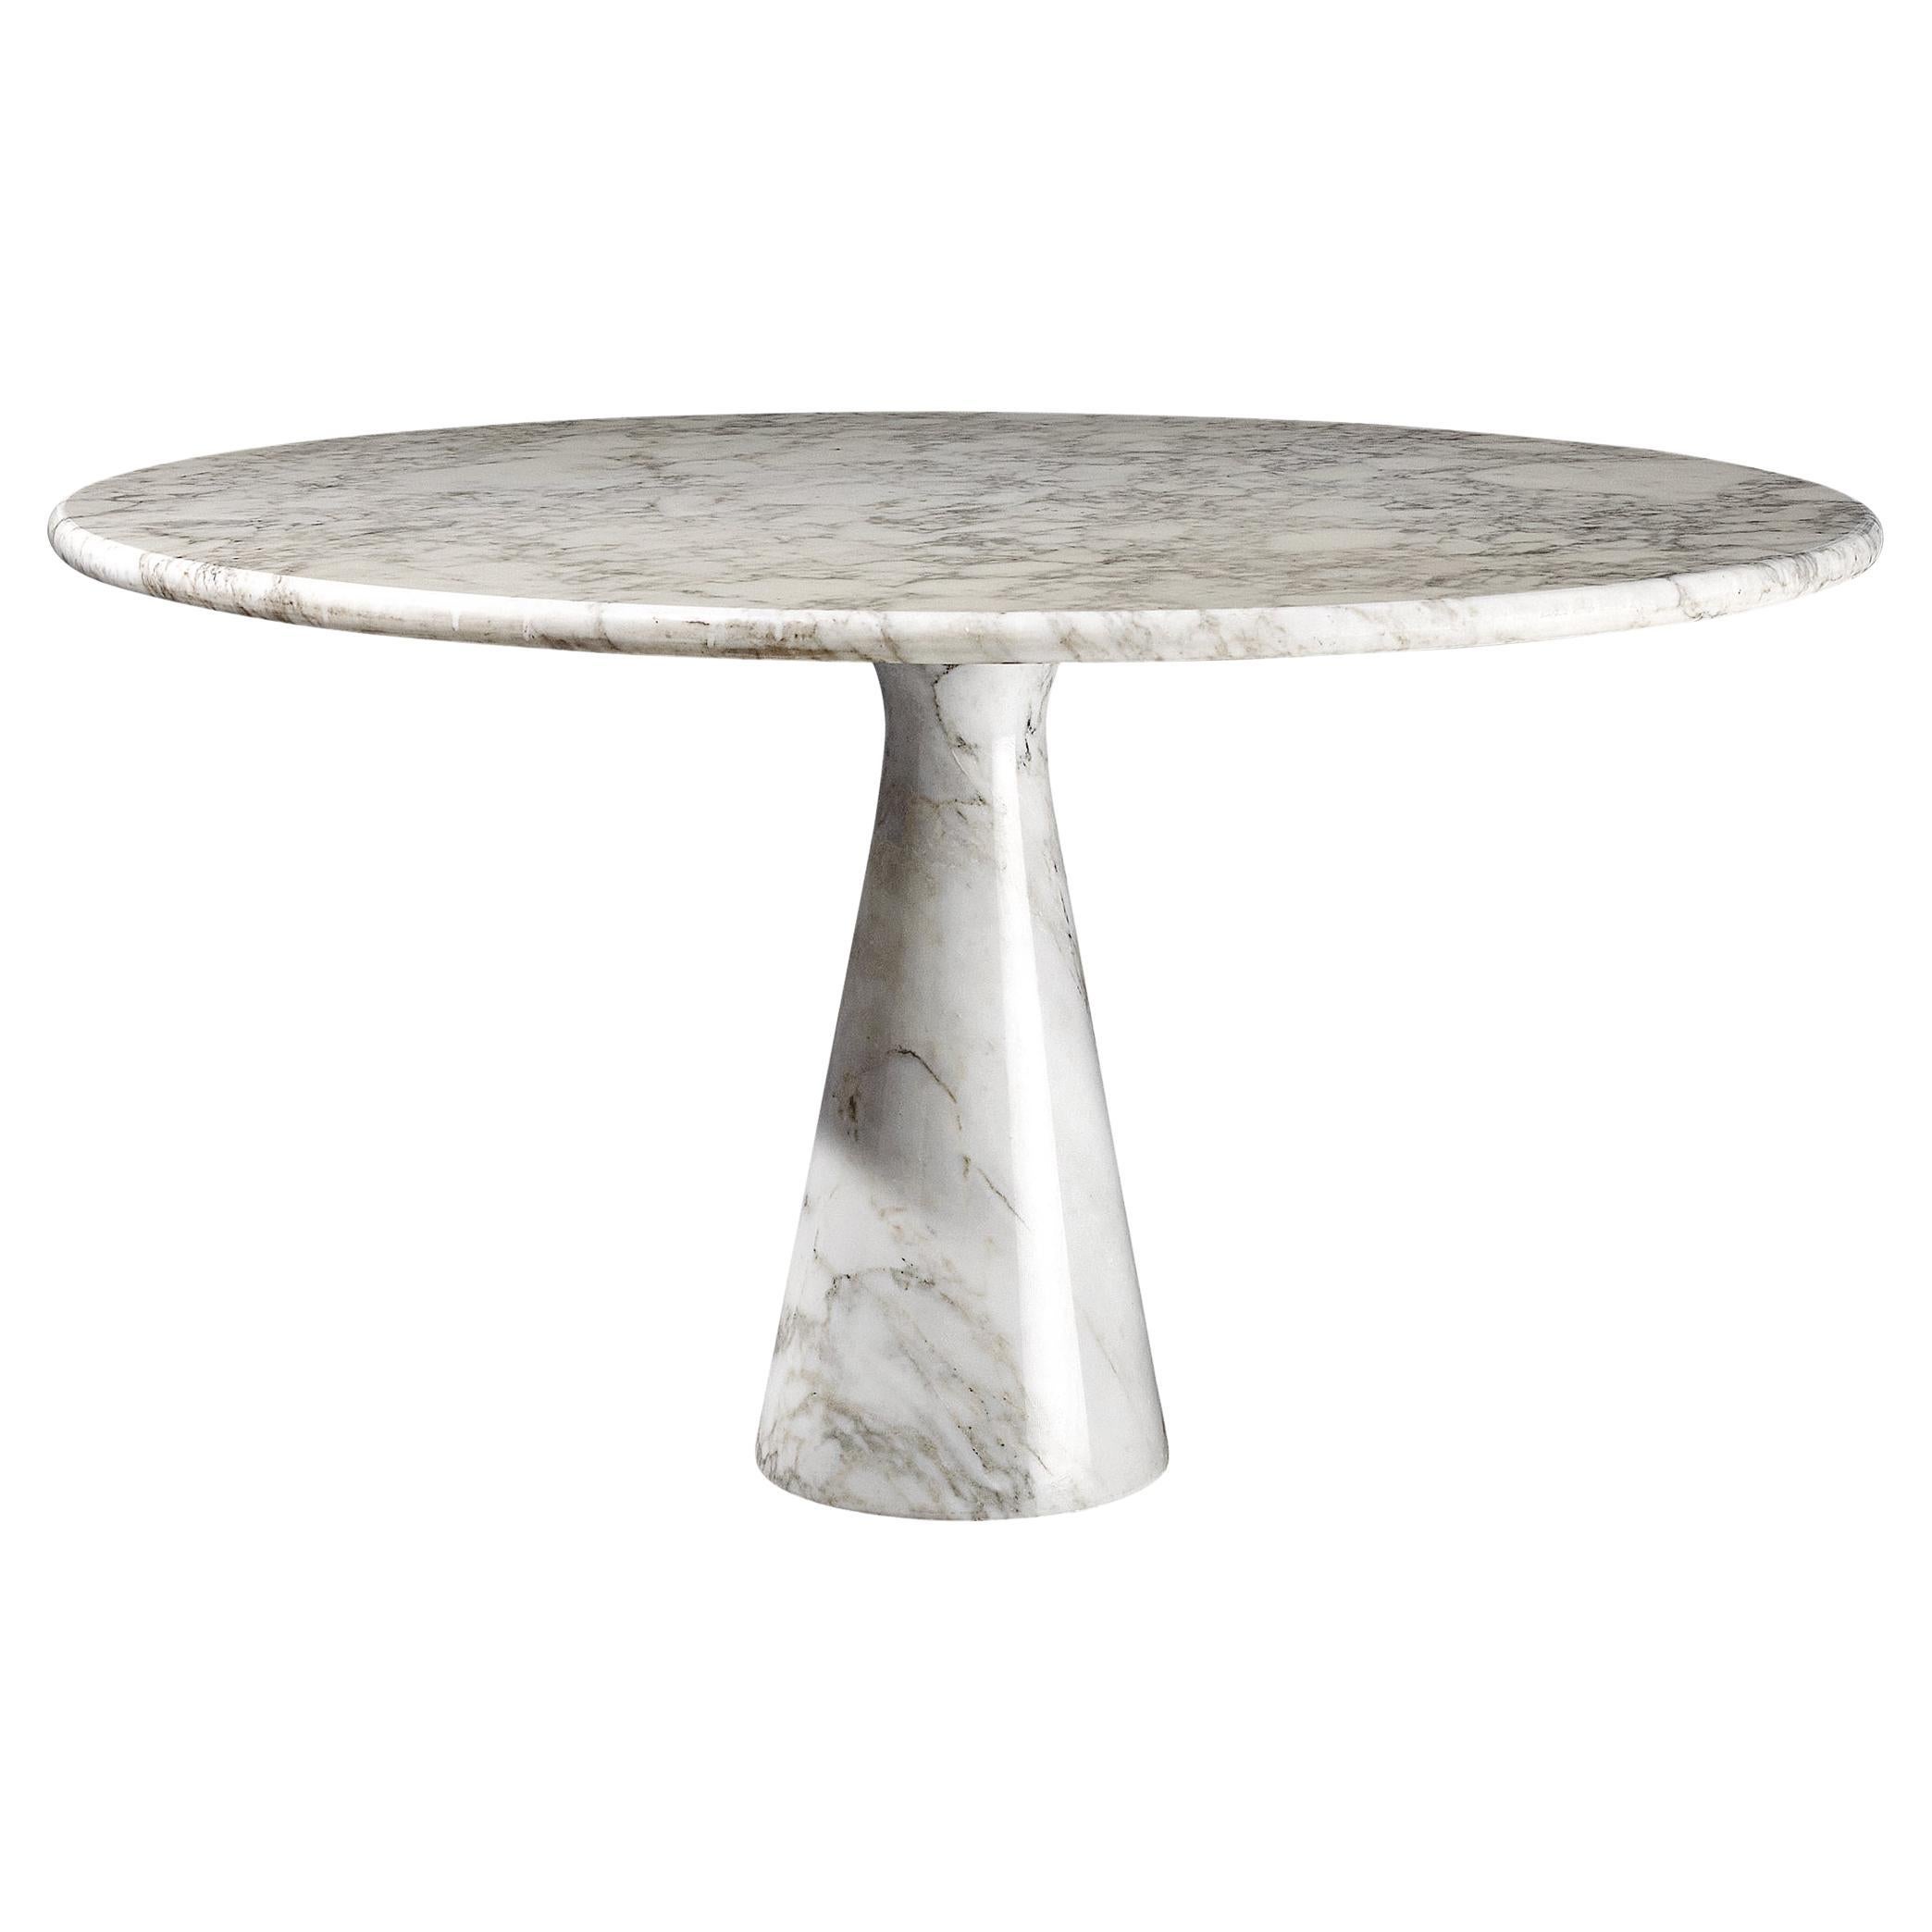 Angelo Mangiarotti for Skipper 'M1' Dining Table in Carrara Marble